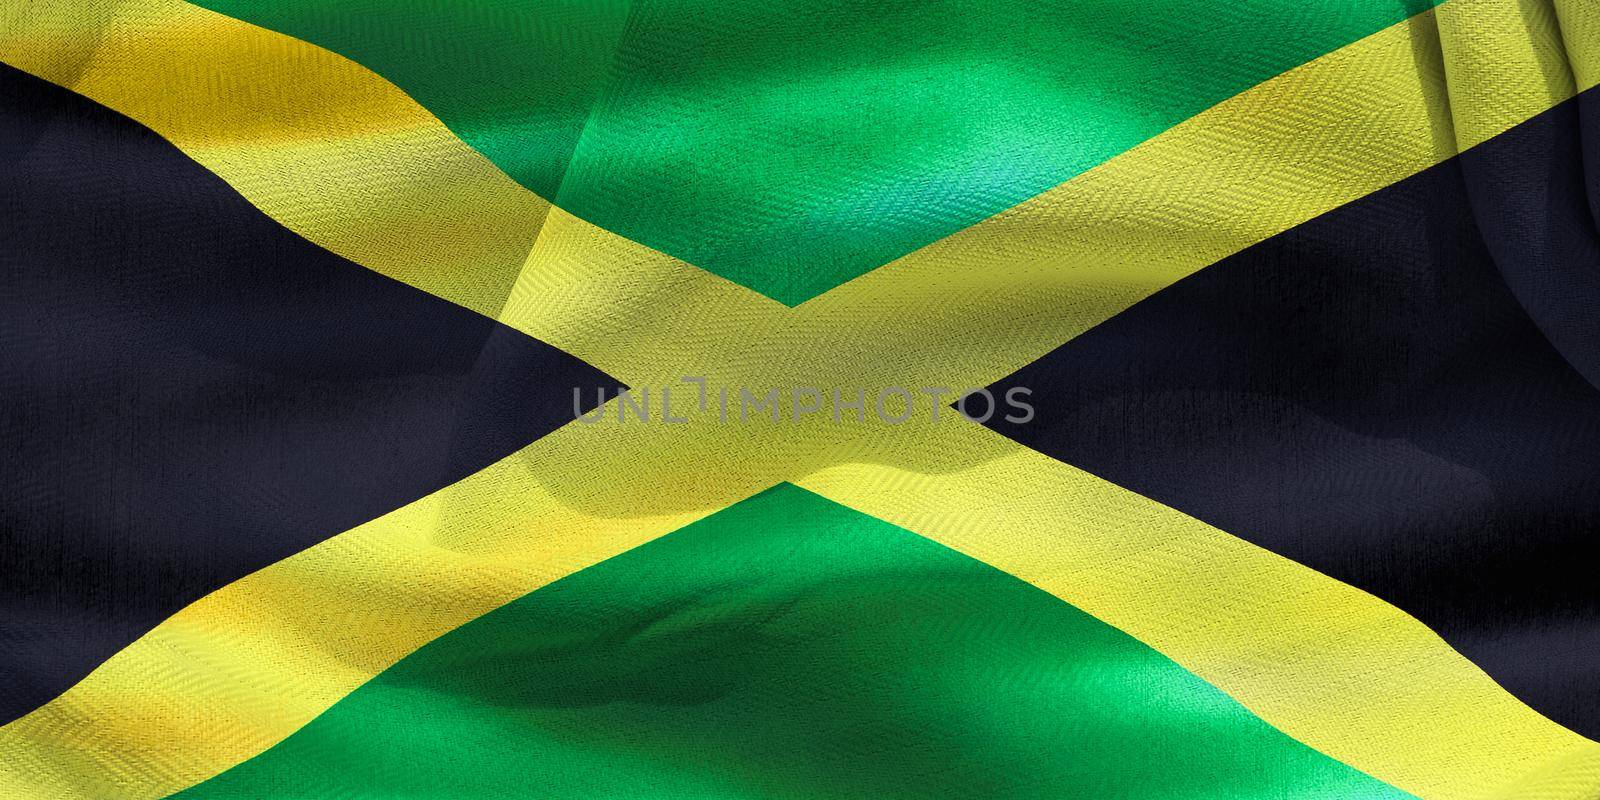 3D-Illustration of a Jamaica flag - realistic waving fabric flag by MP_foto71